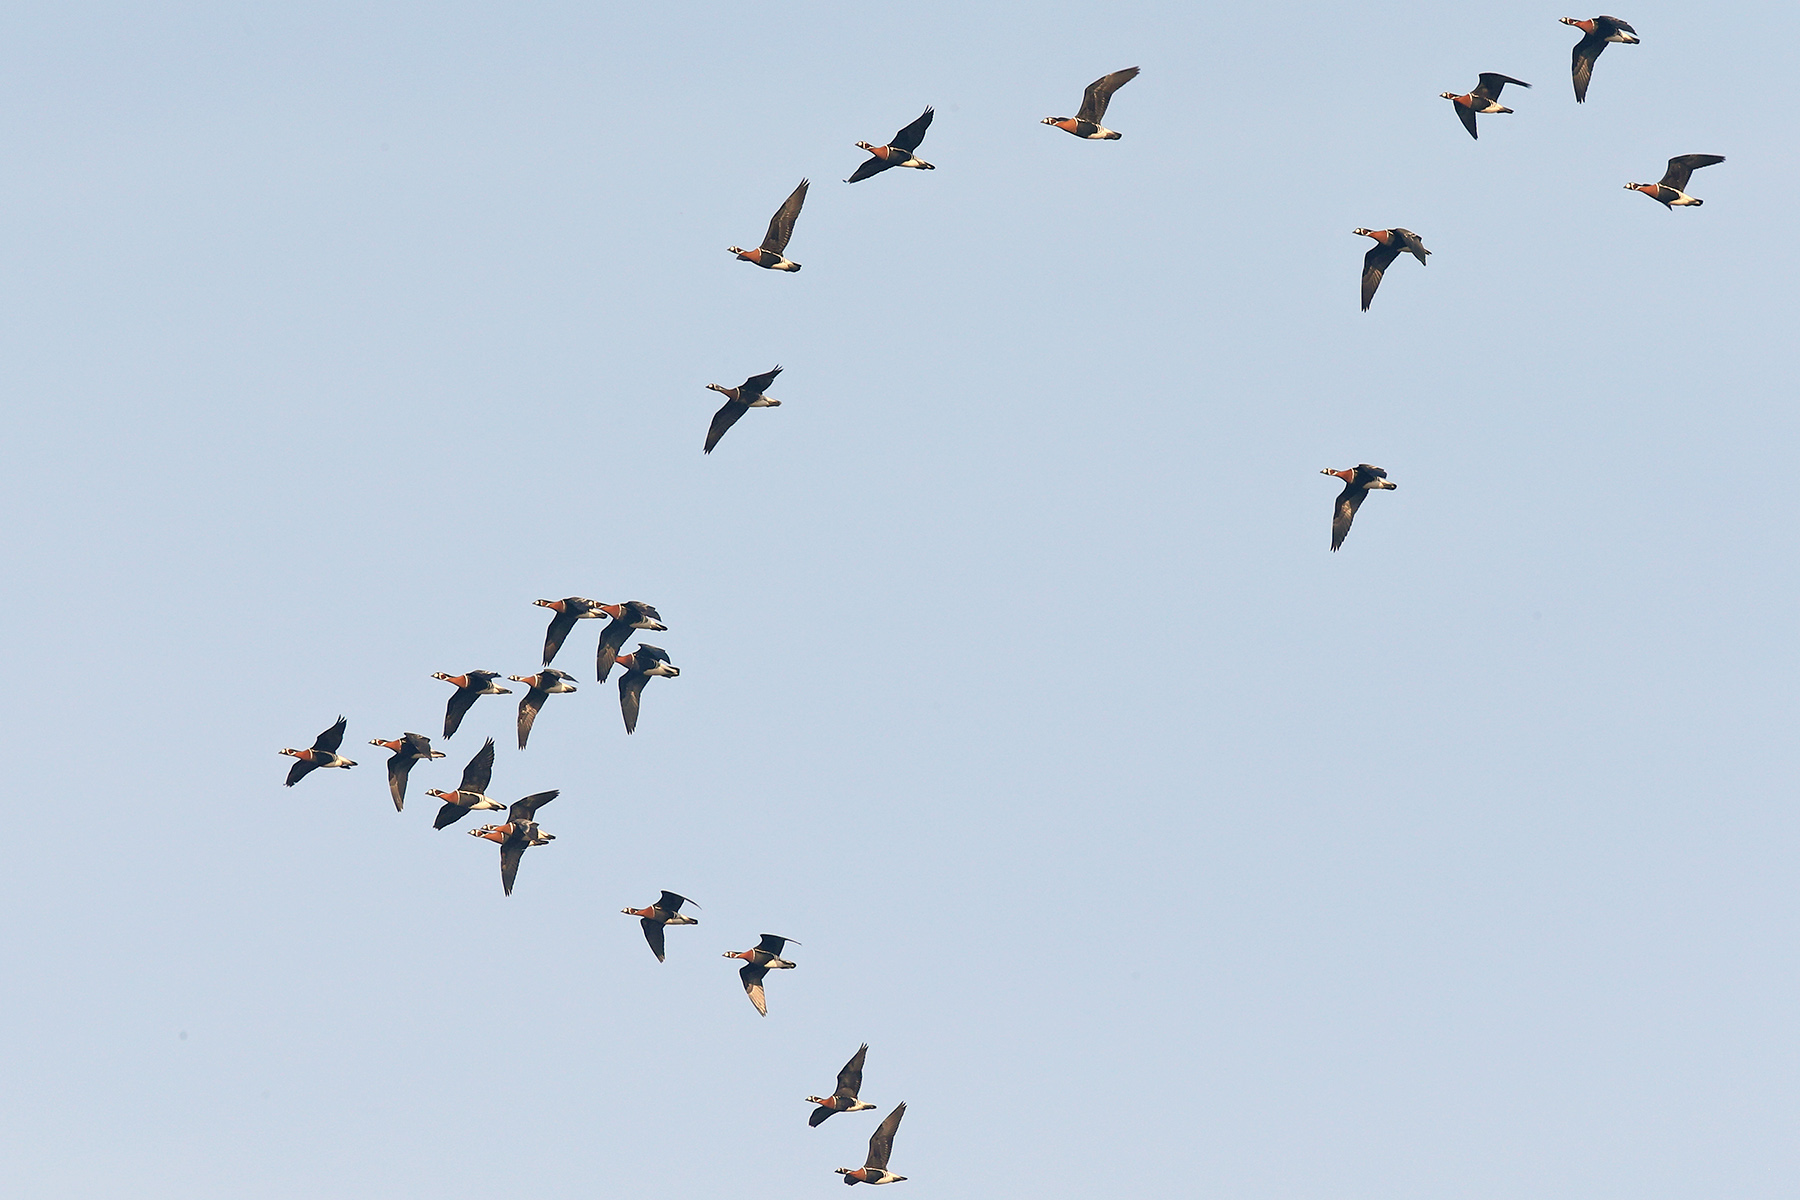 Red-breasted Geese in Hungary (image by János Oláh)